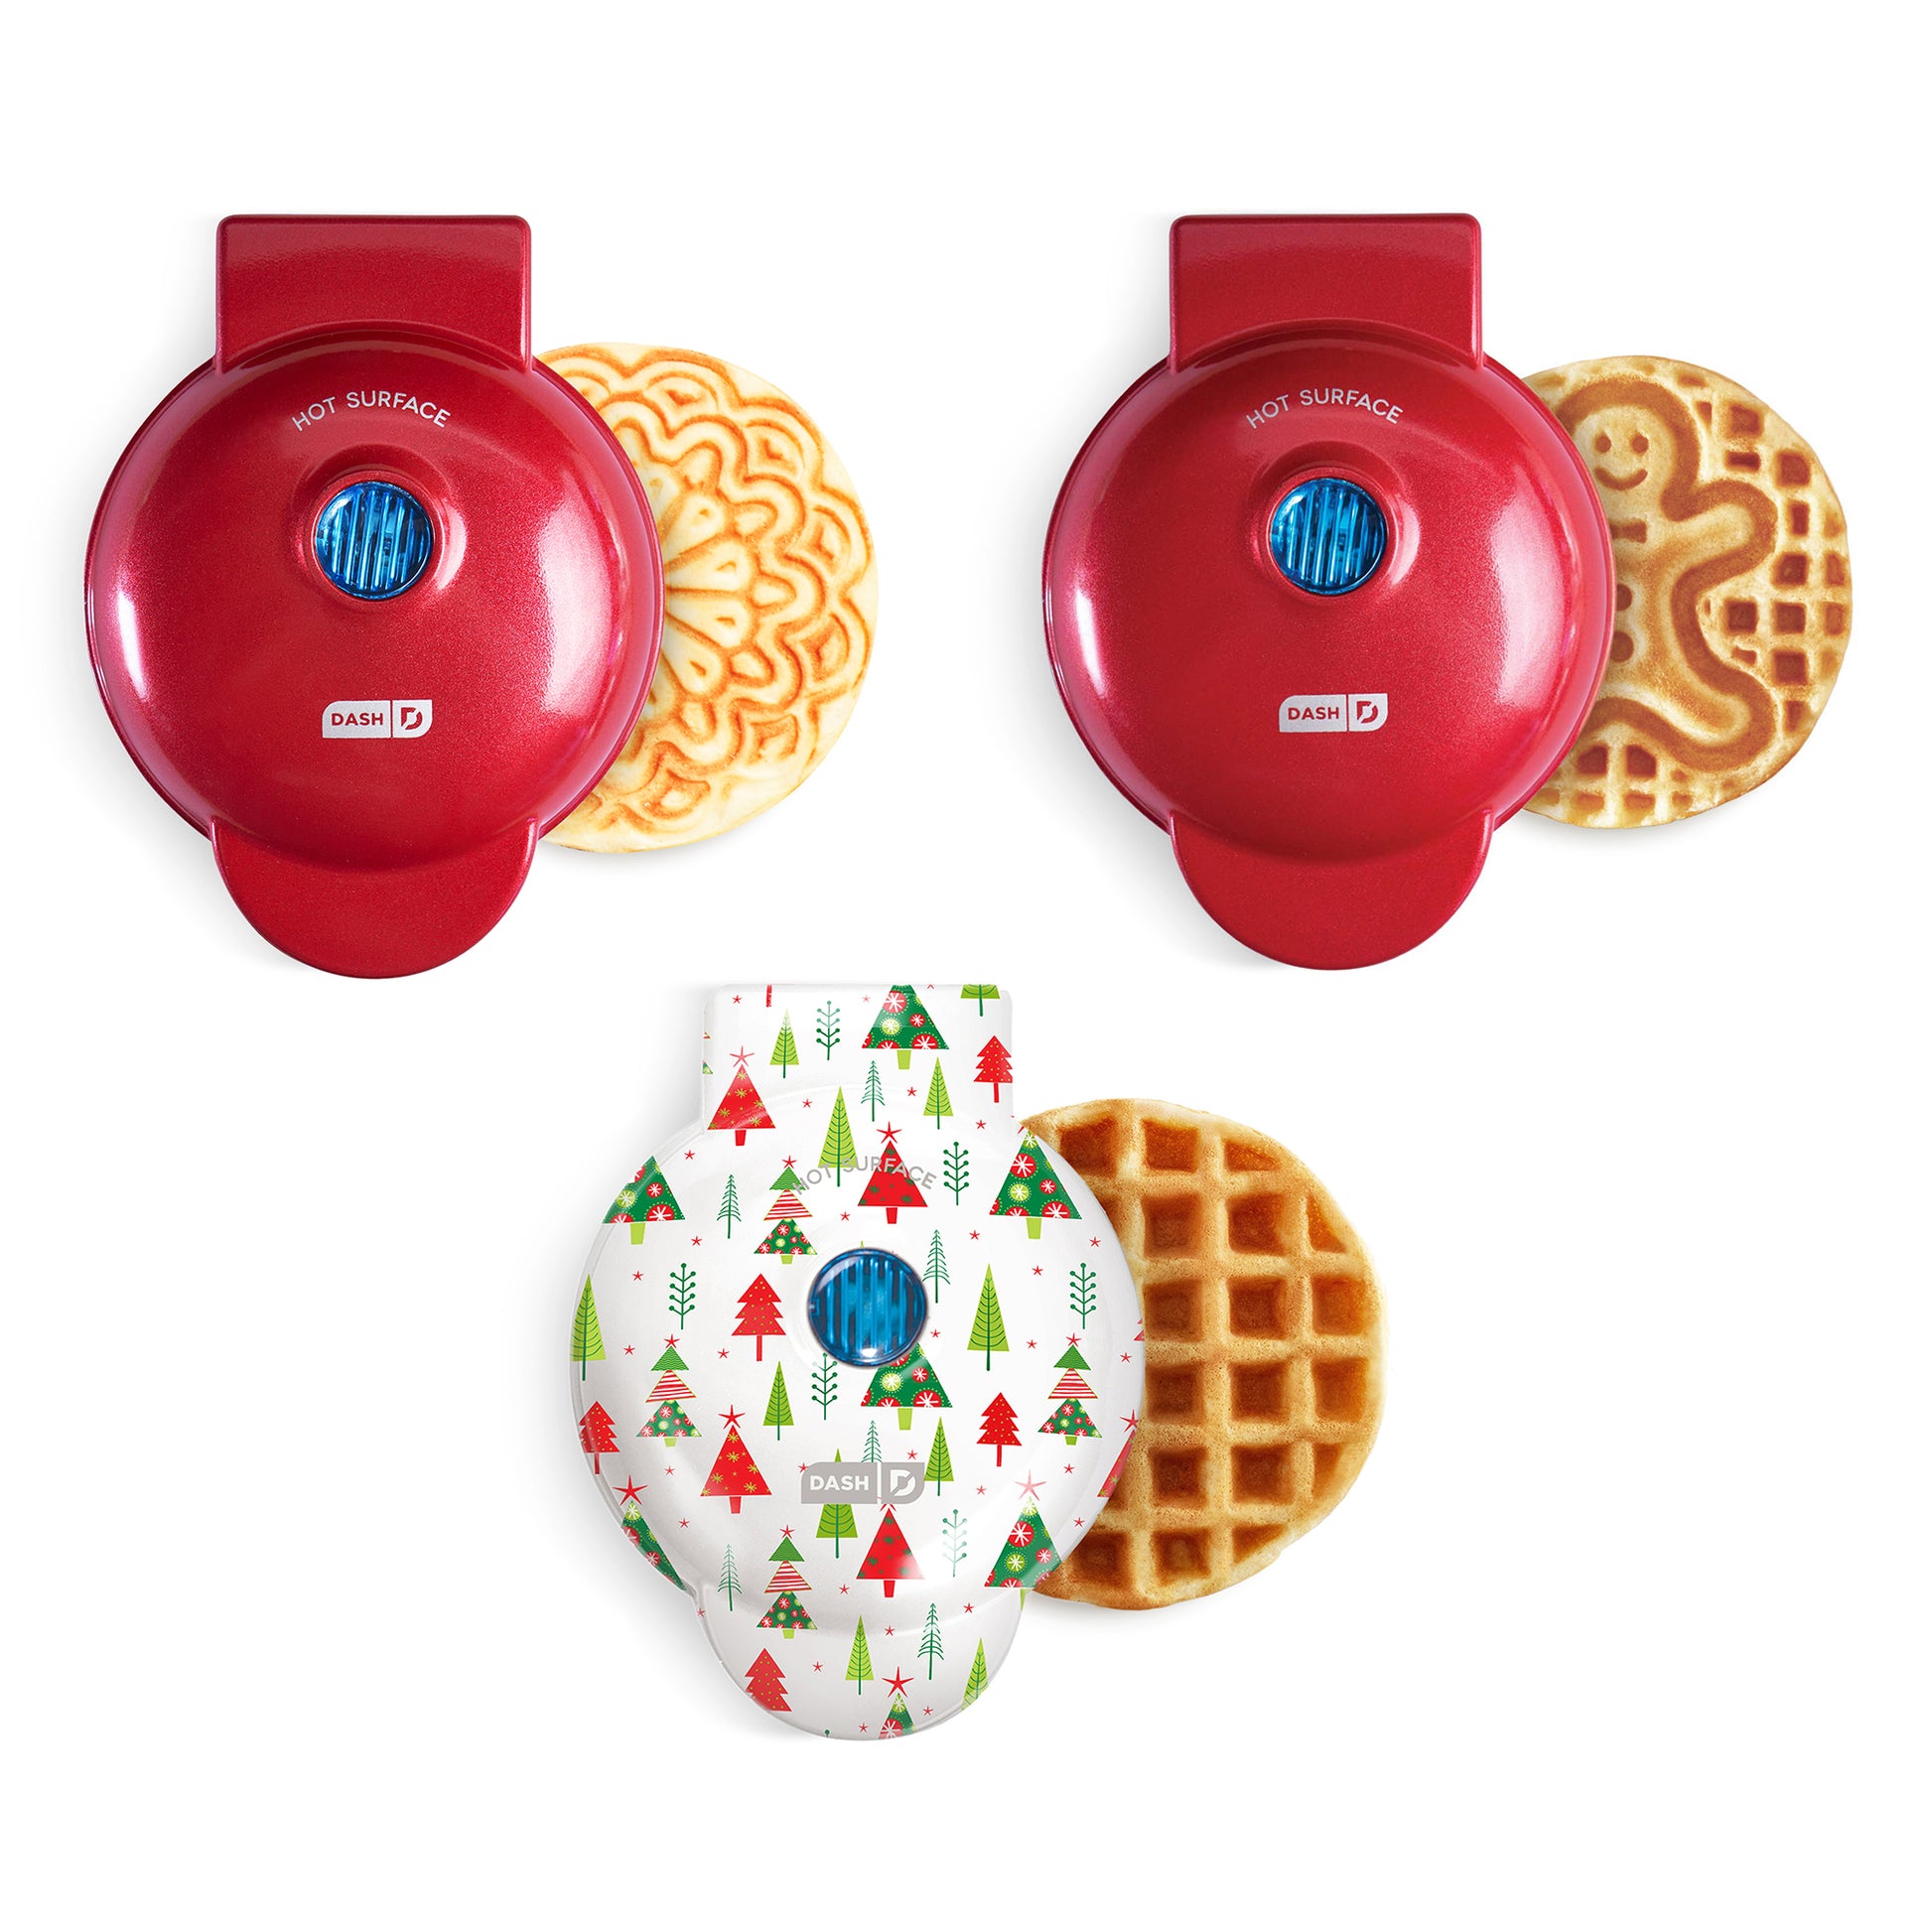 Holiday Mini Maker Set of 3  Dash Pizzelle + Gingerbread + Christmas Tree Print  